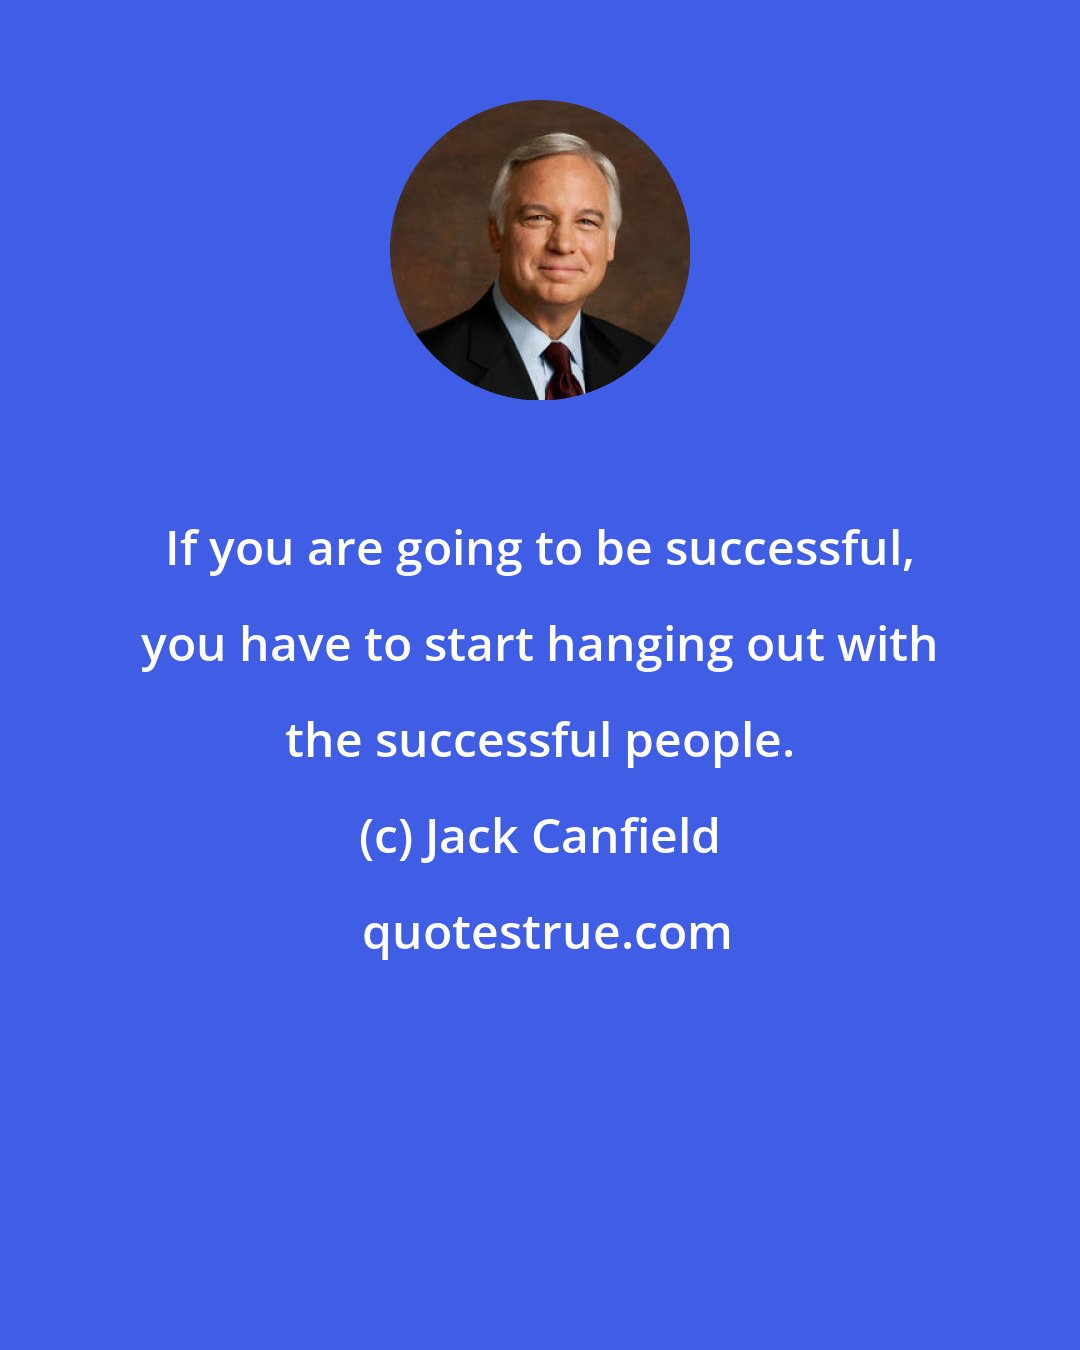 Jack Canfield: If you are going to be successful, you have to start hanging out with the successful people.